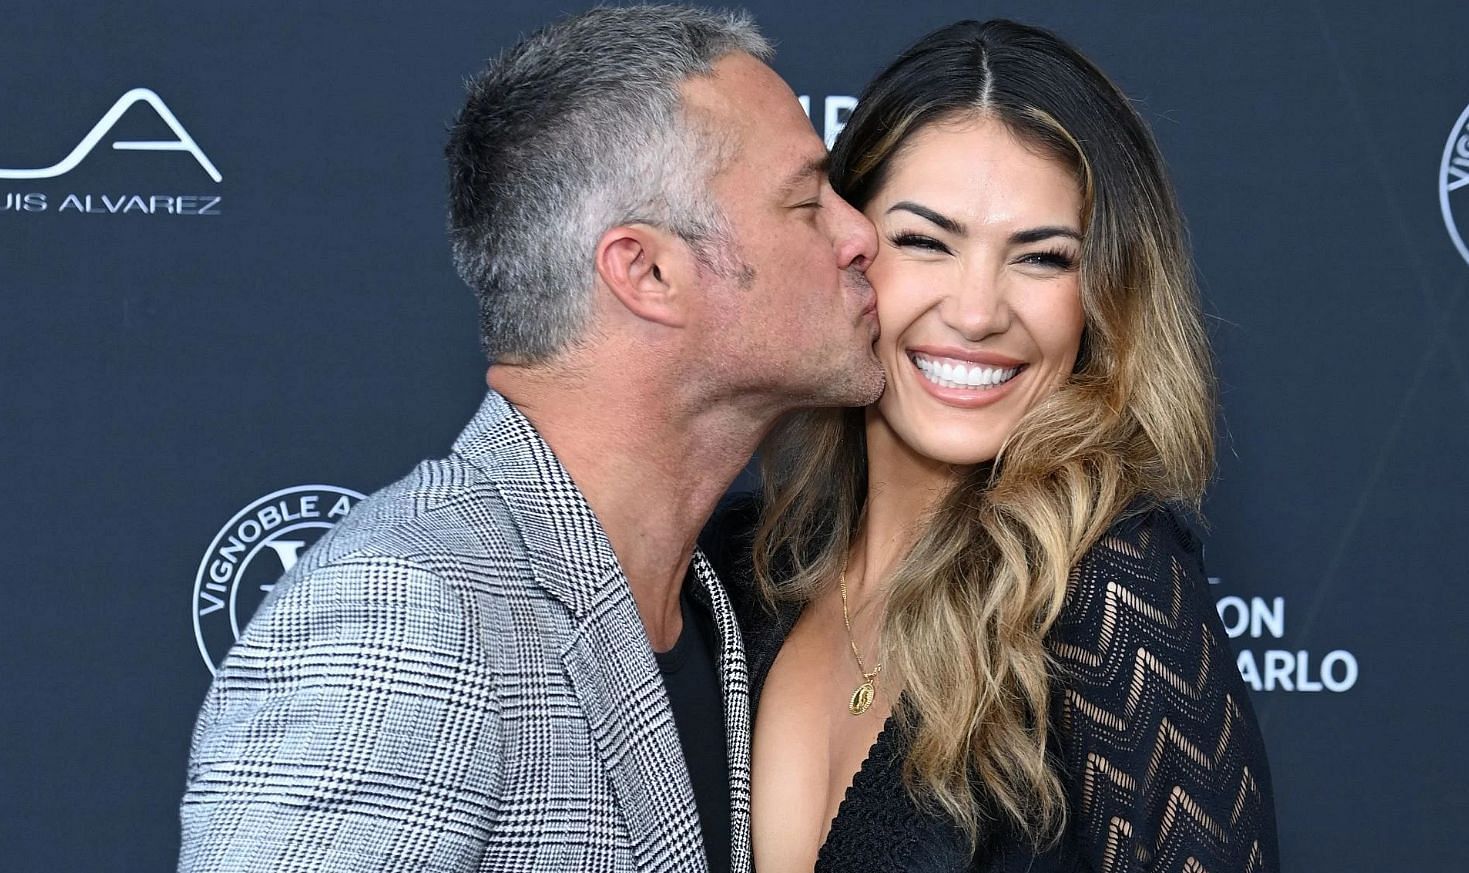 Taylor Kinney ties the knot with long-time girlfriend, Ashley Cruger. (Image via Pascal Le Segretain/Getty Images)